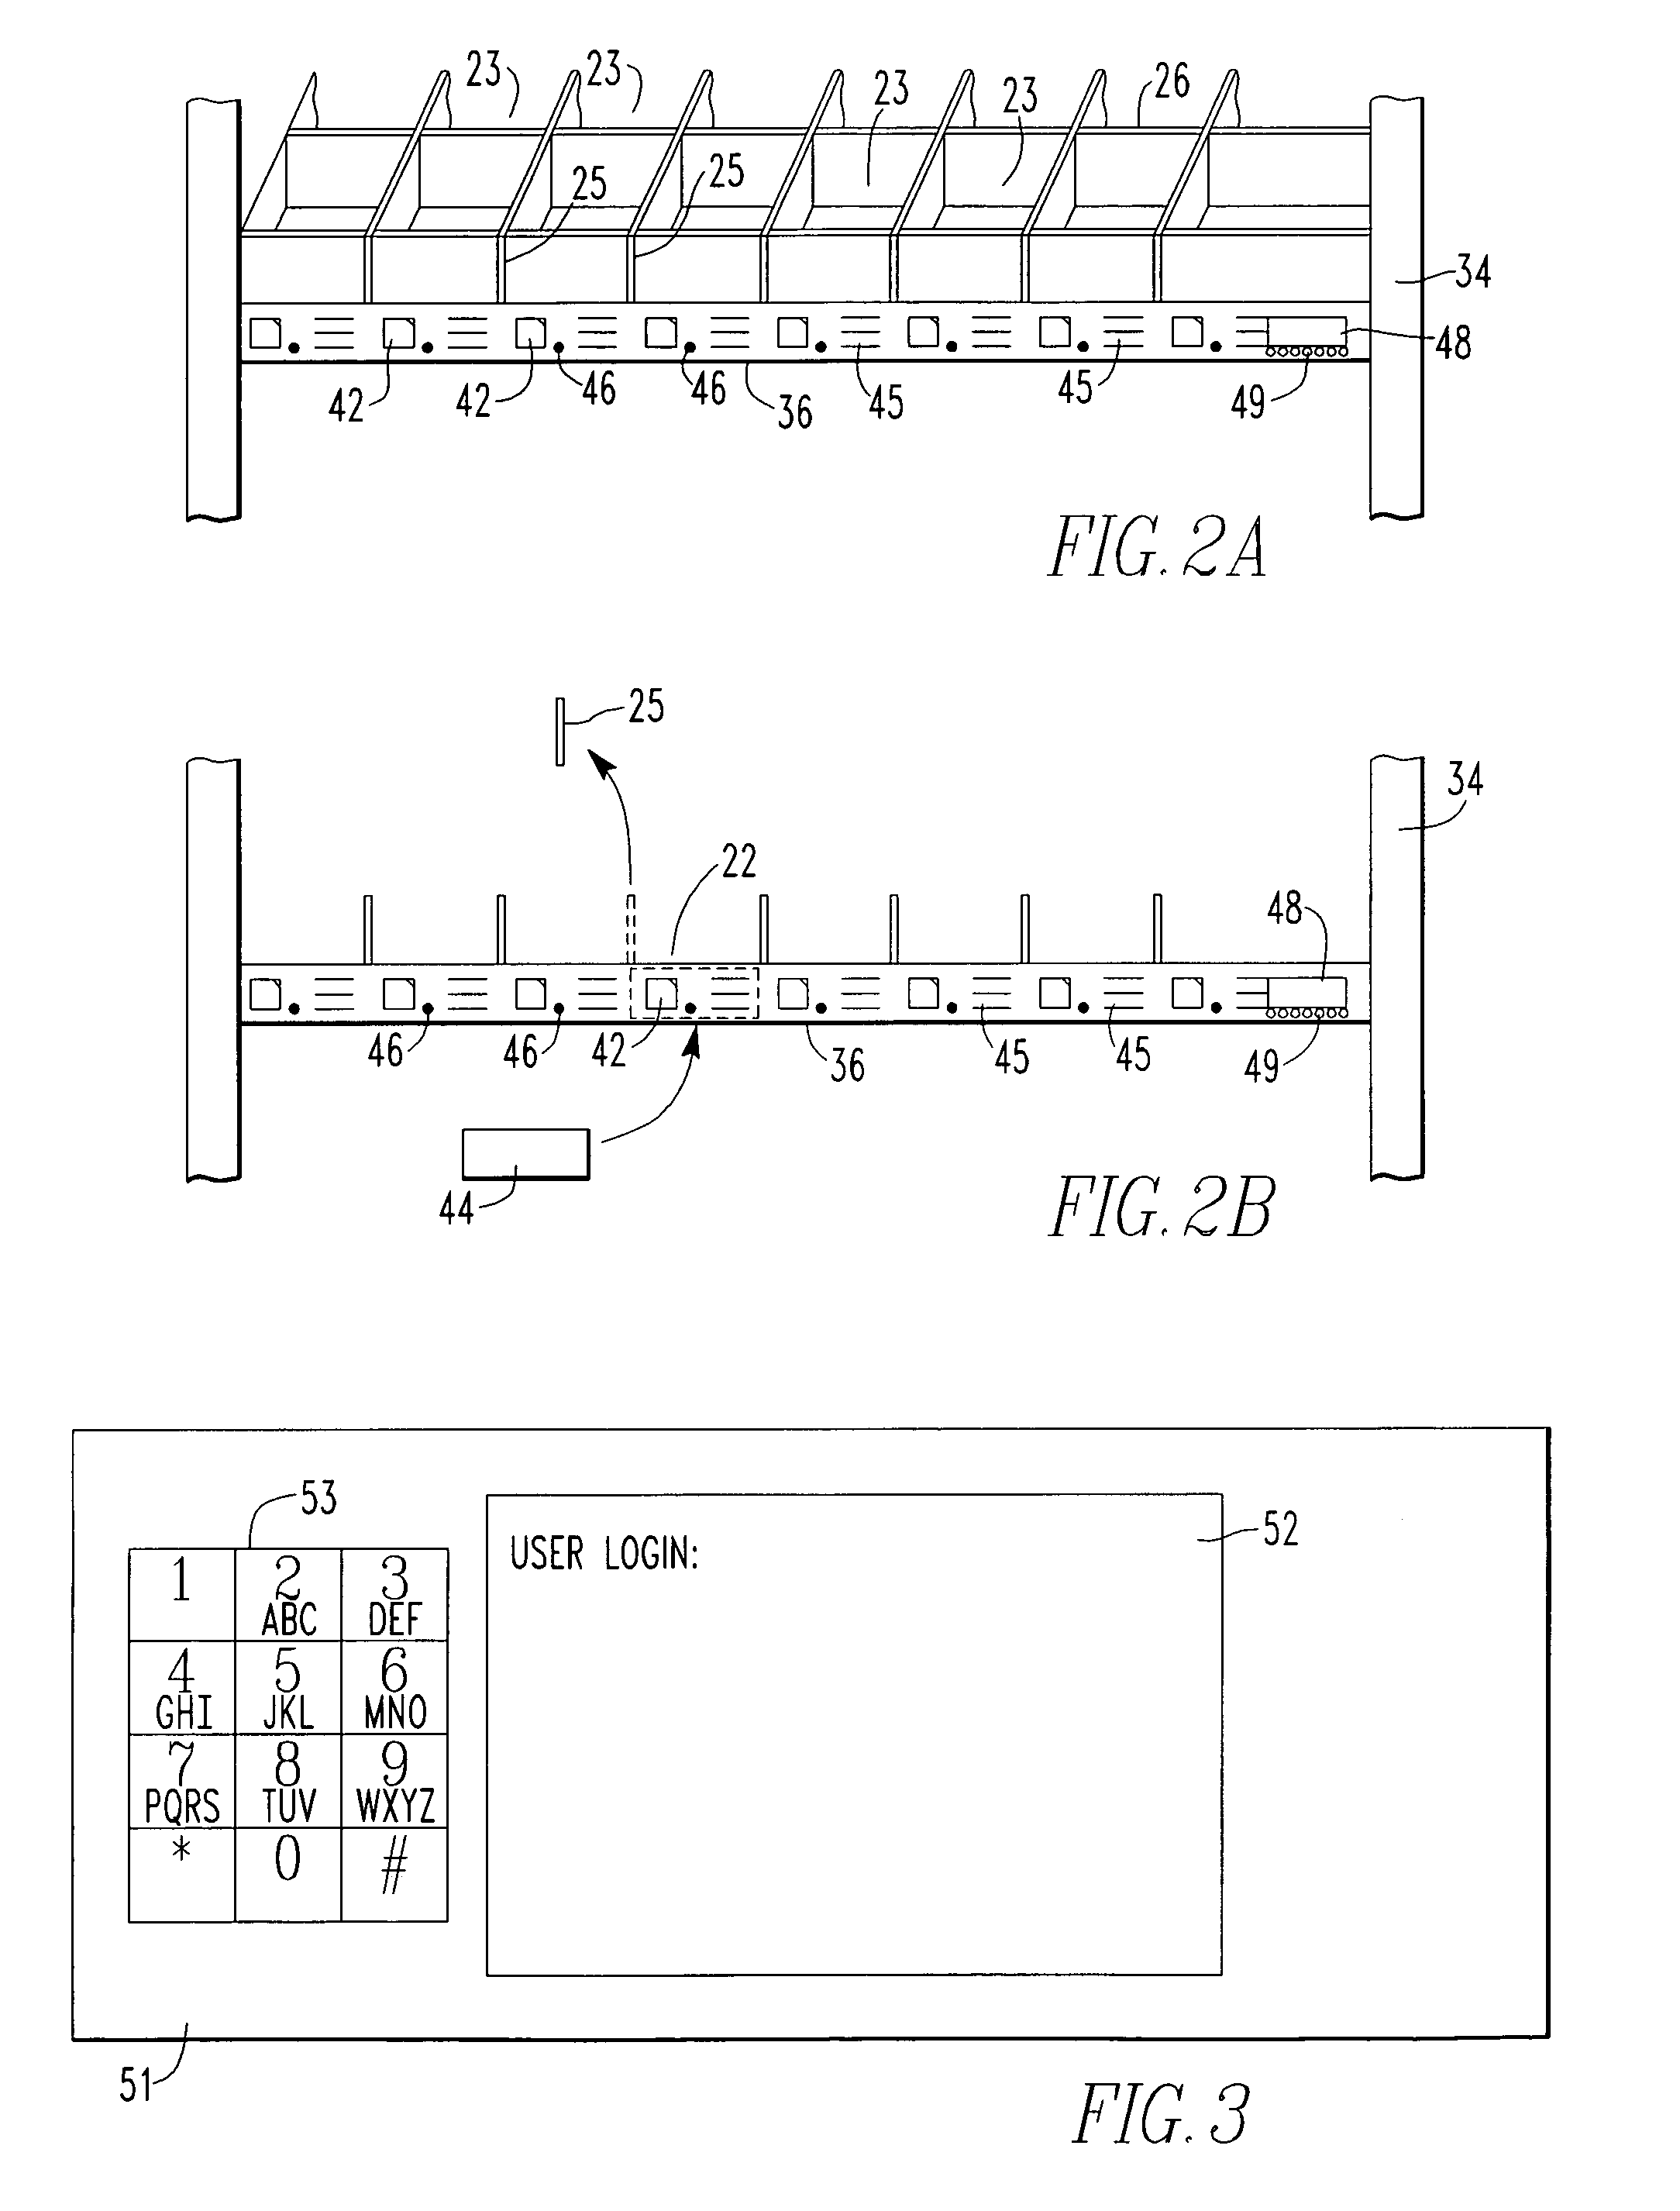 Method of operating a dispensing cabinet